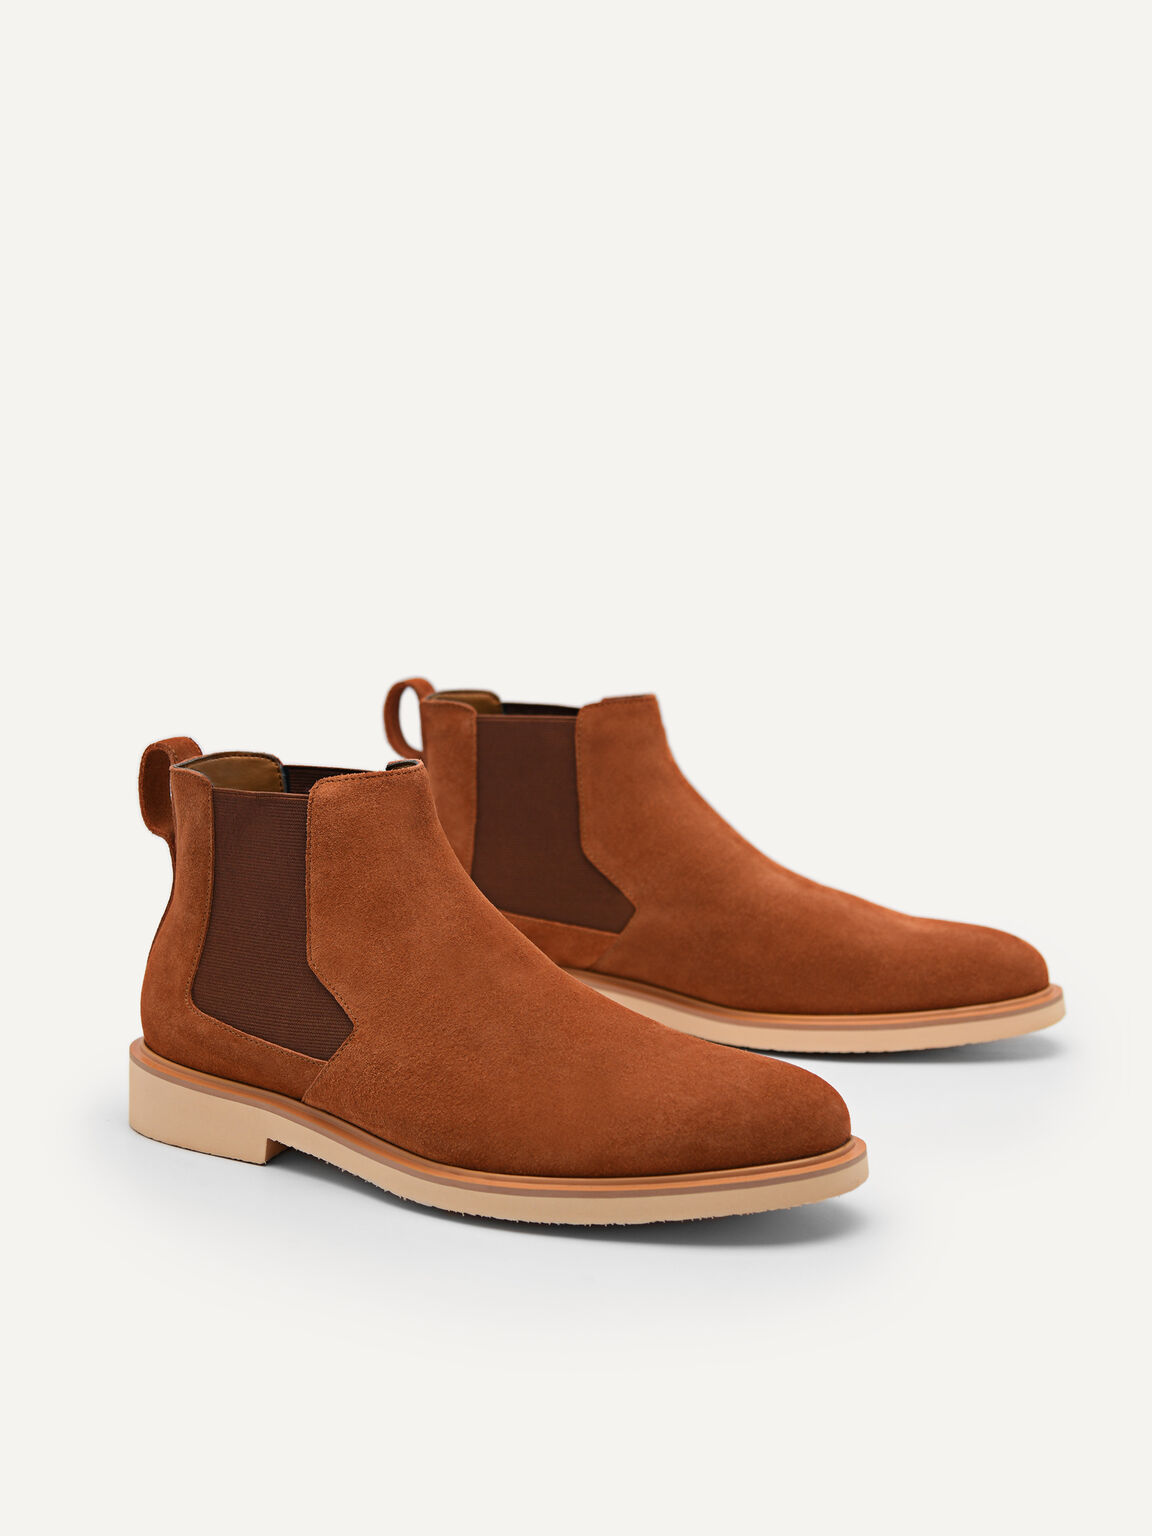 Camel Leather Ankle Boots, Camel